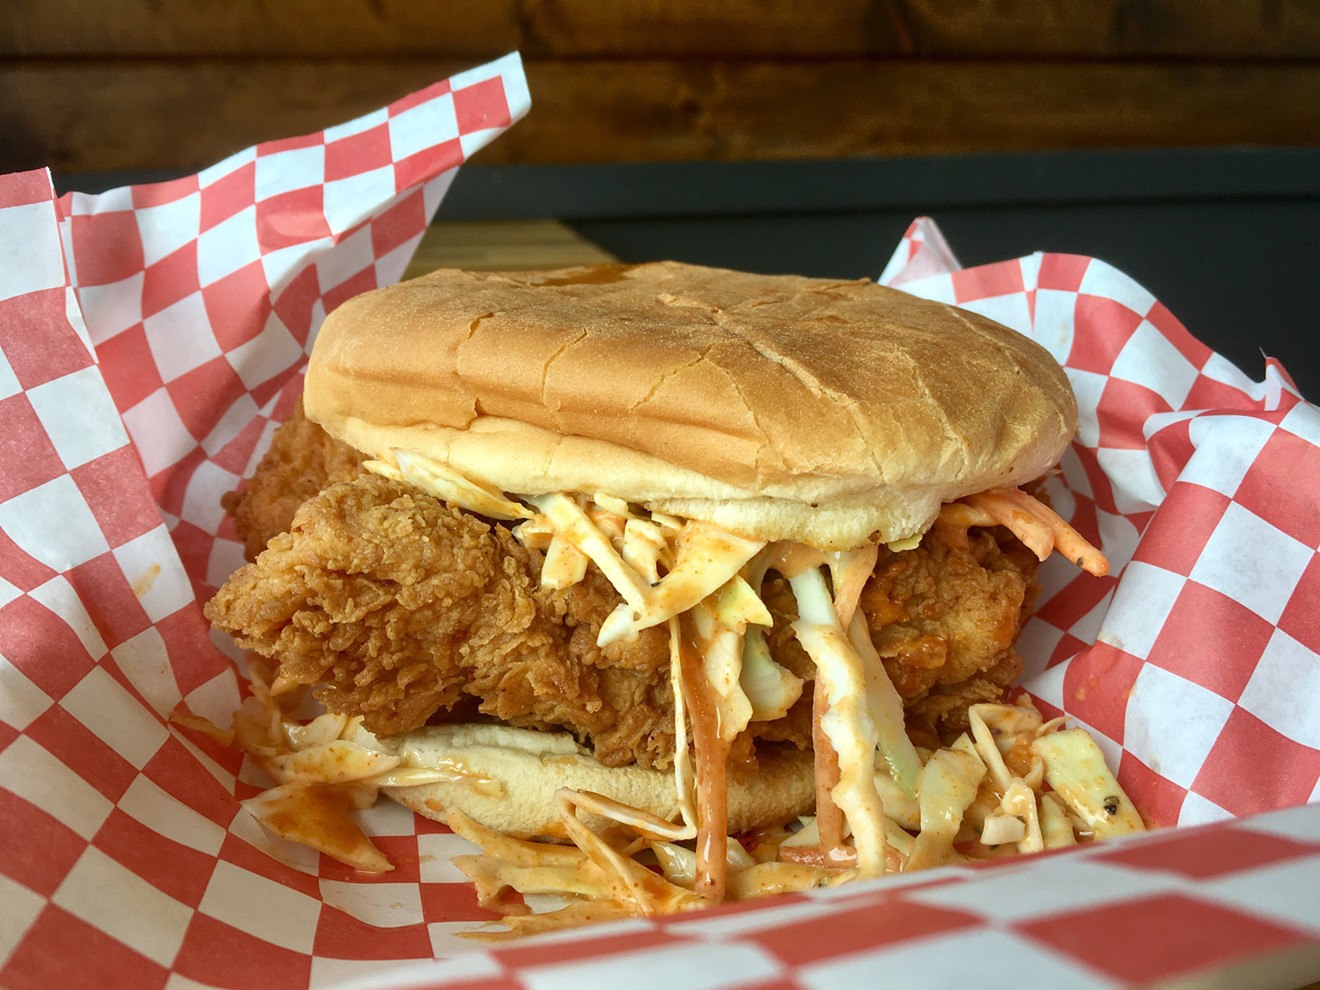 Mike's Sandwich at Mike's Chicken, fried chicken tenders under spicy cole slaw for $4.79